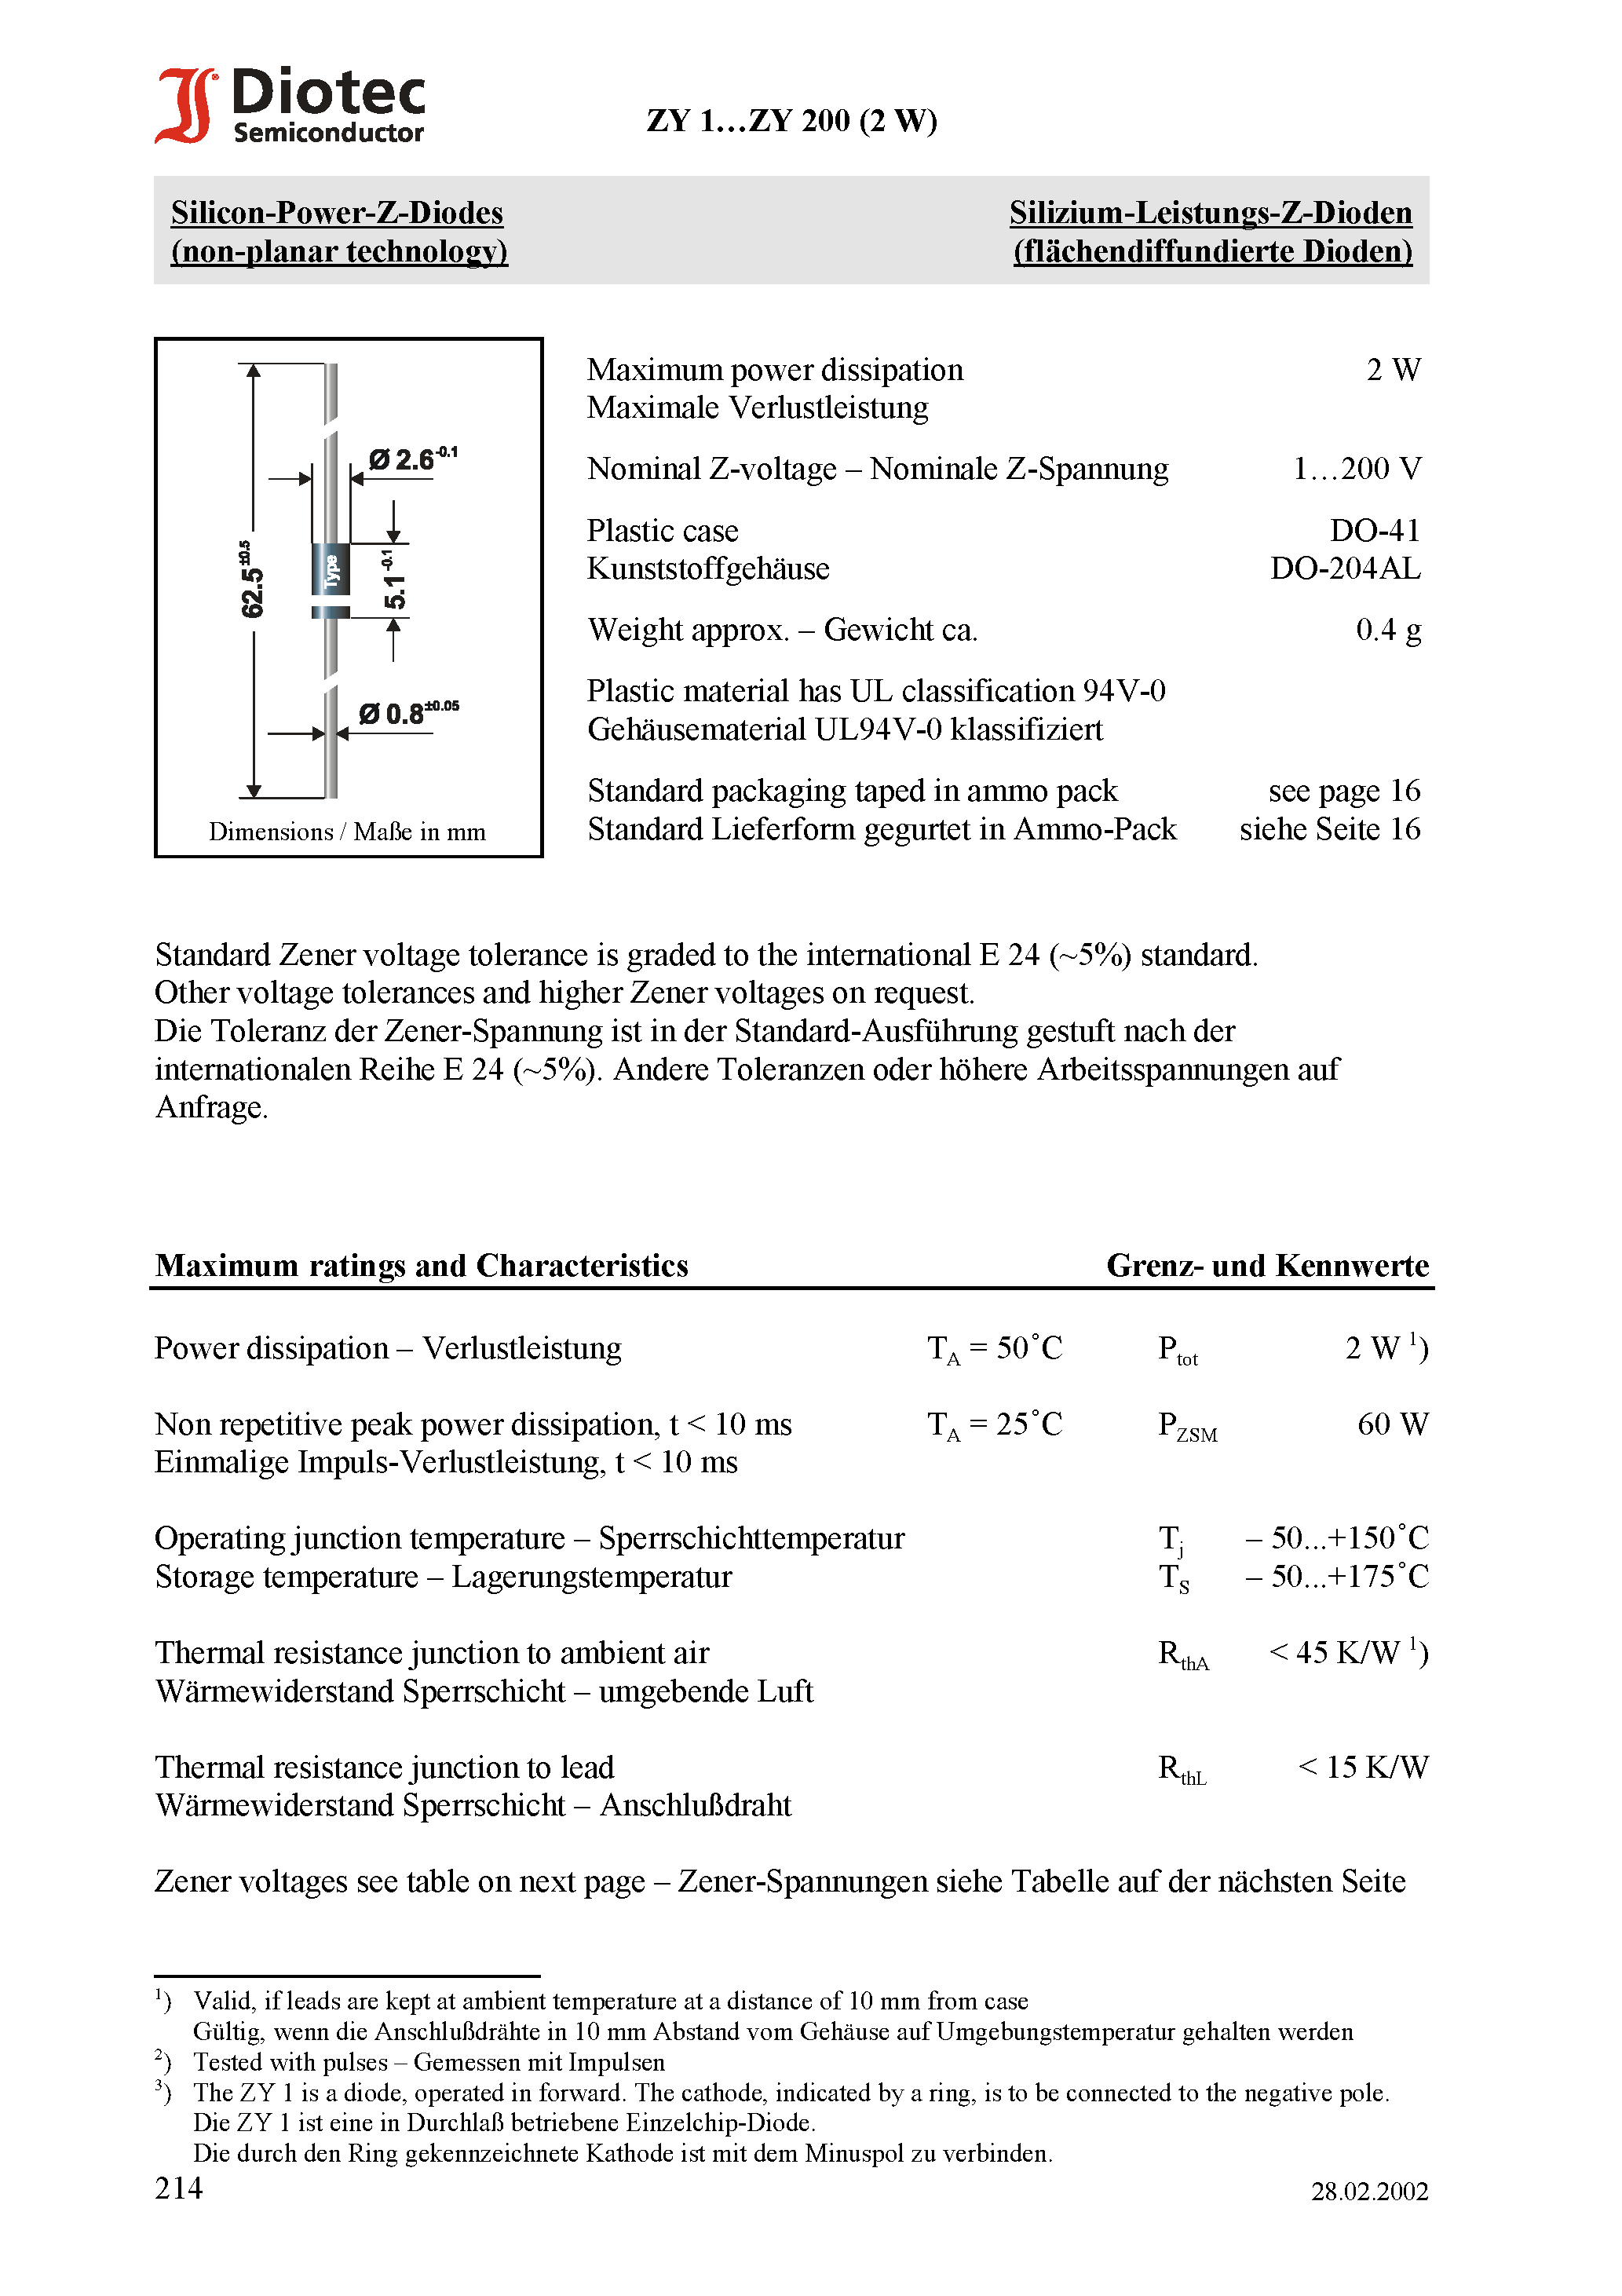 Datasheet ZY56 - Silicon-Power-Z-Diodes (non-planar technology) page 1